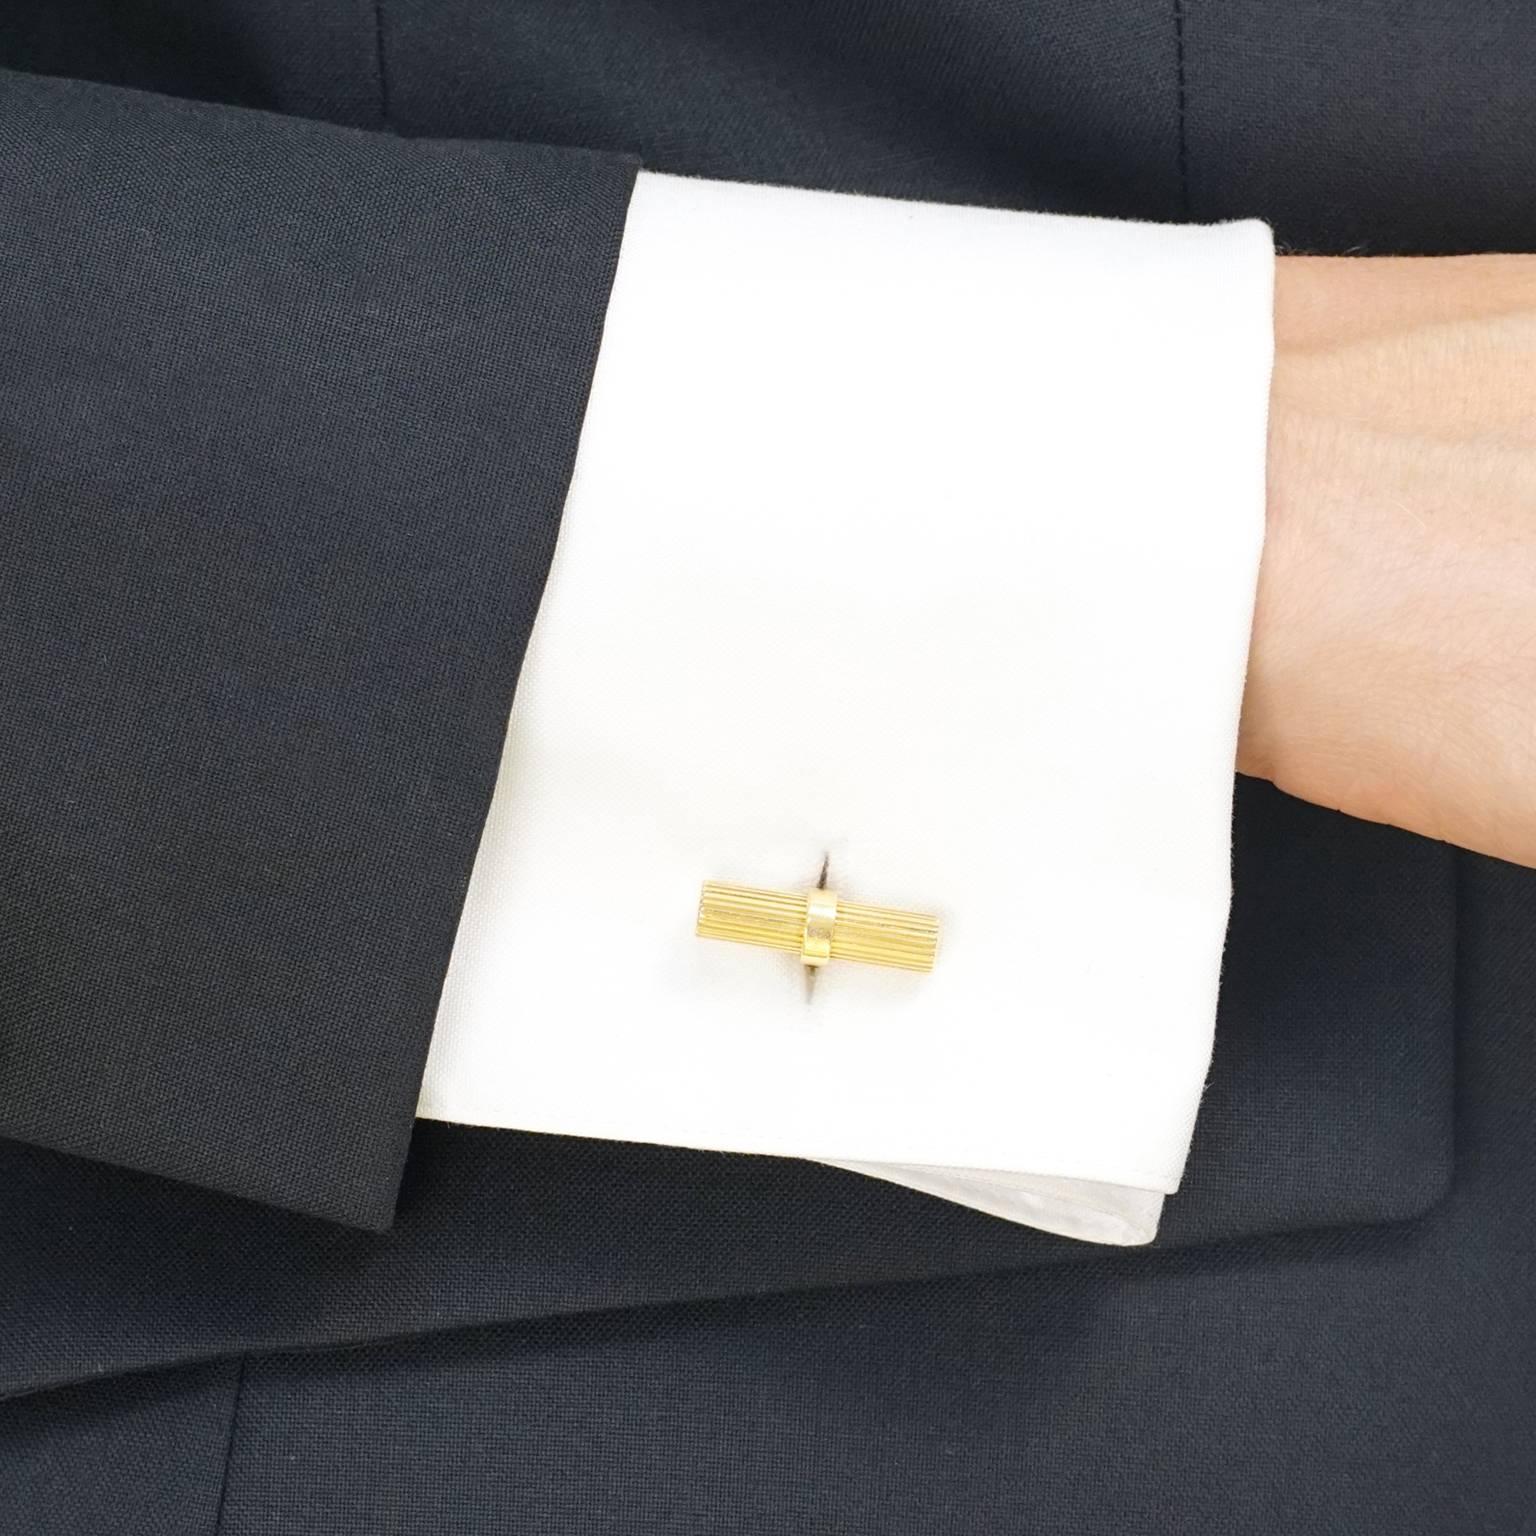 Circa 1960s, 18k, Boucheron, Paris, France.   1960s chic meets cool French style. These Boucheron cufflinks are flawless with a suit, delightfully sporty dressing up a jacket, or dressed down with a blazer and jeans. Meticulously made, they are in